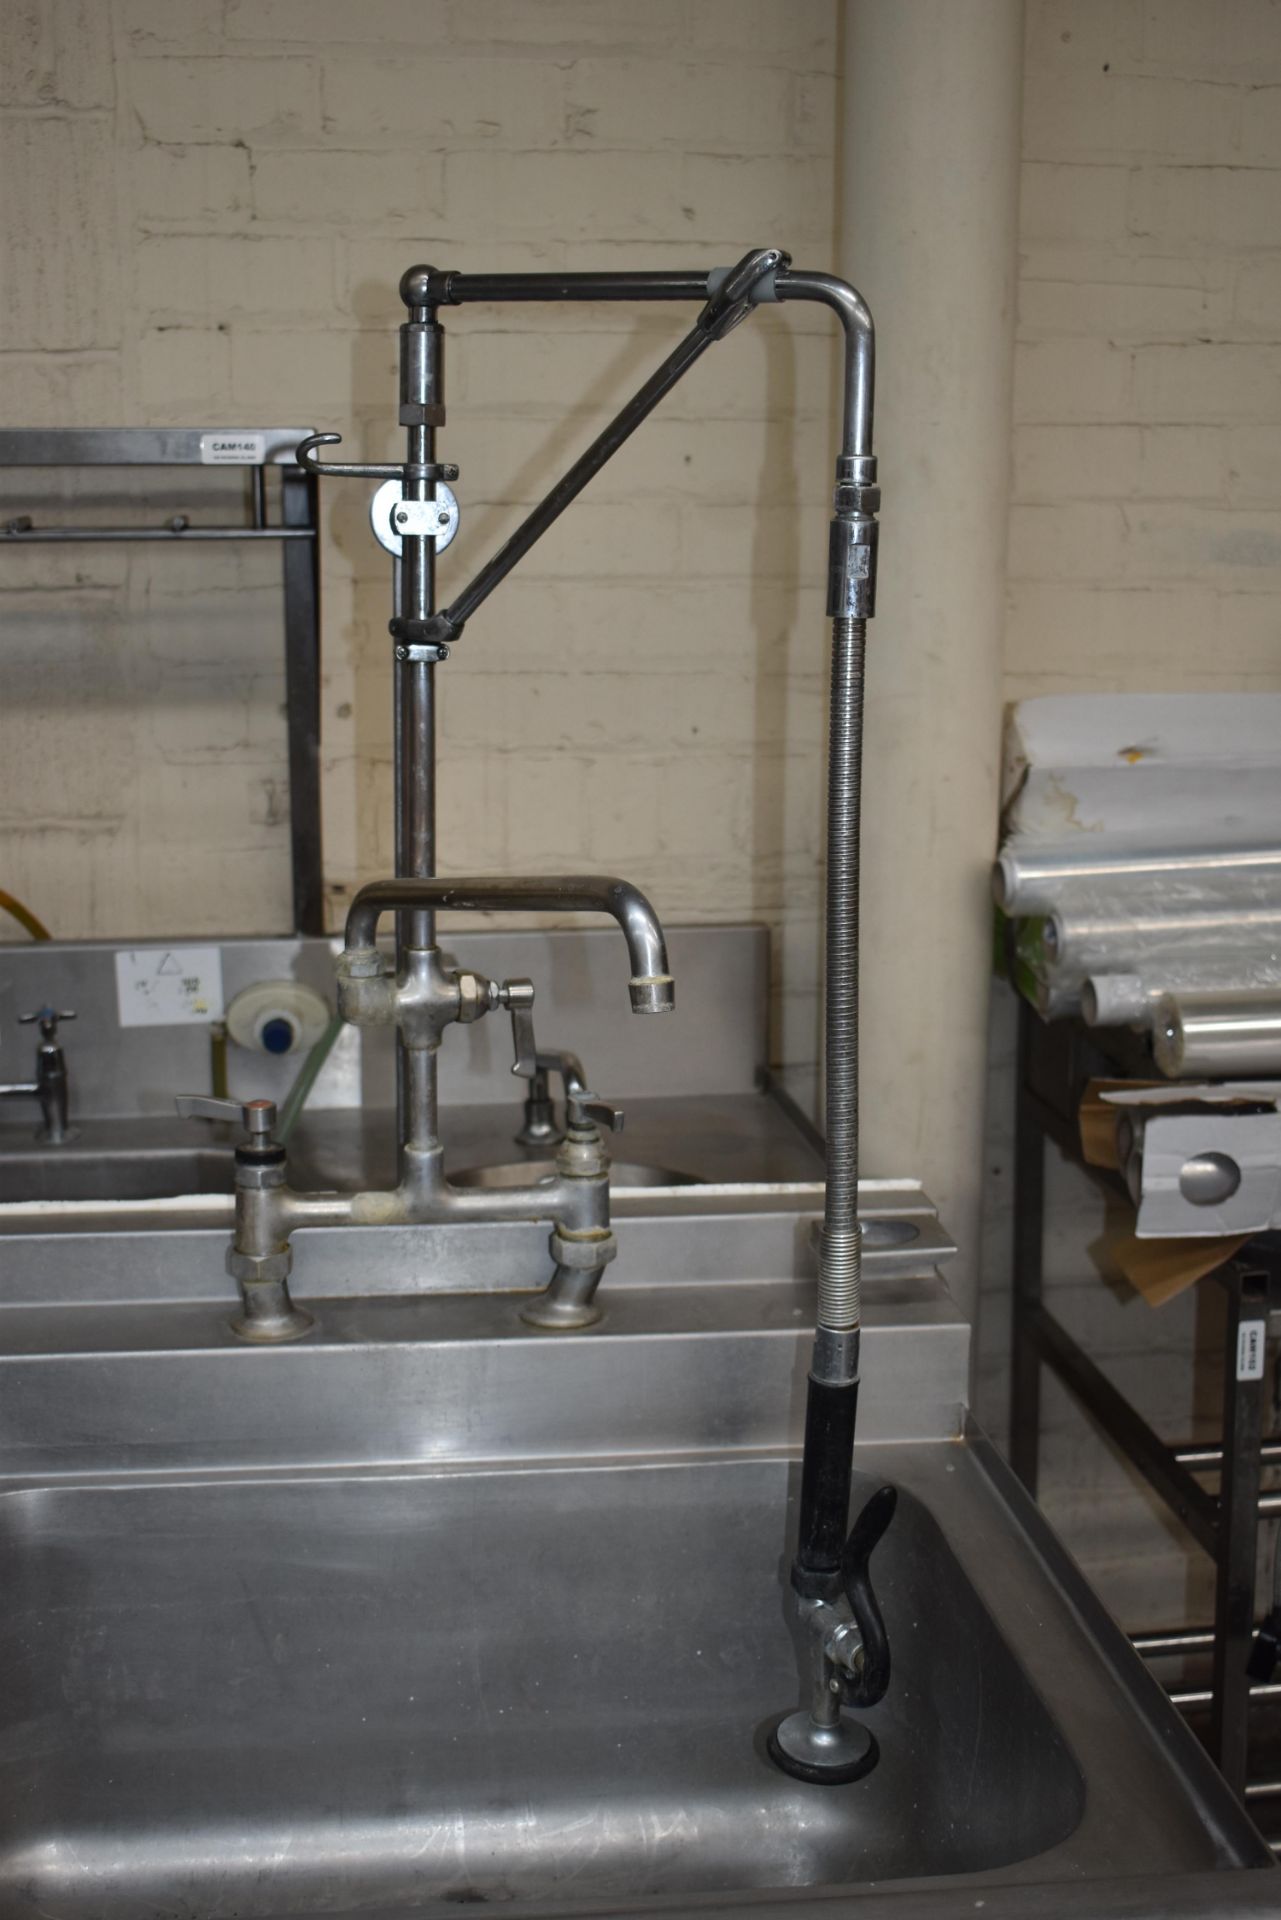 1 x Stainless Steel Commercial Wash Basin Unit With Twin Sink Bowl and Drainers, Mixer Taps, Spray - Image 5 of 12